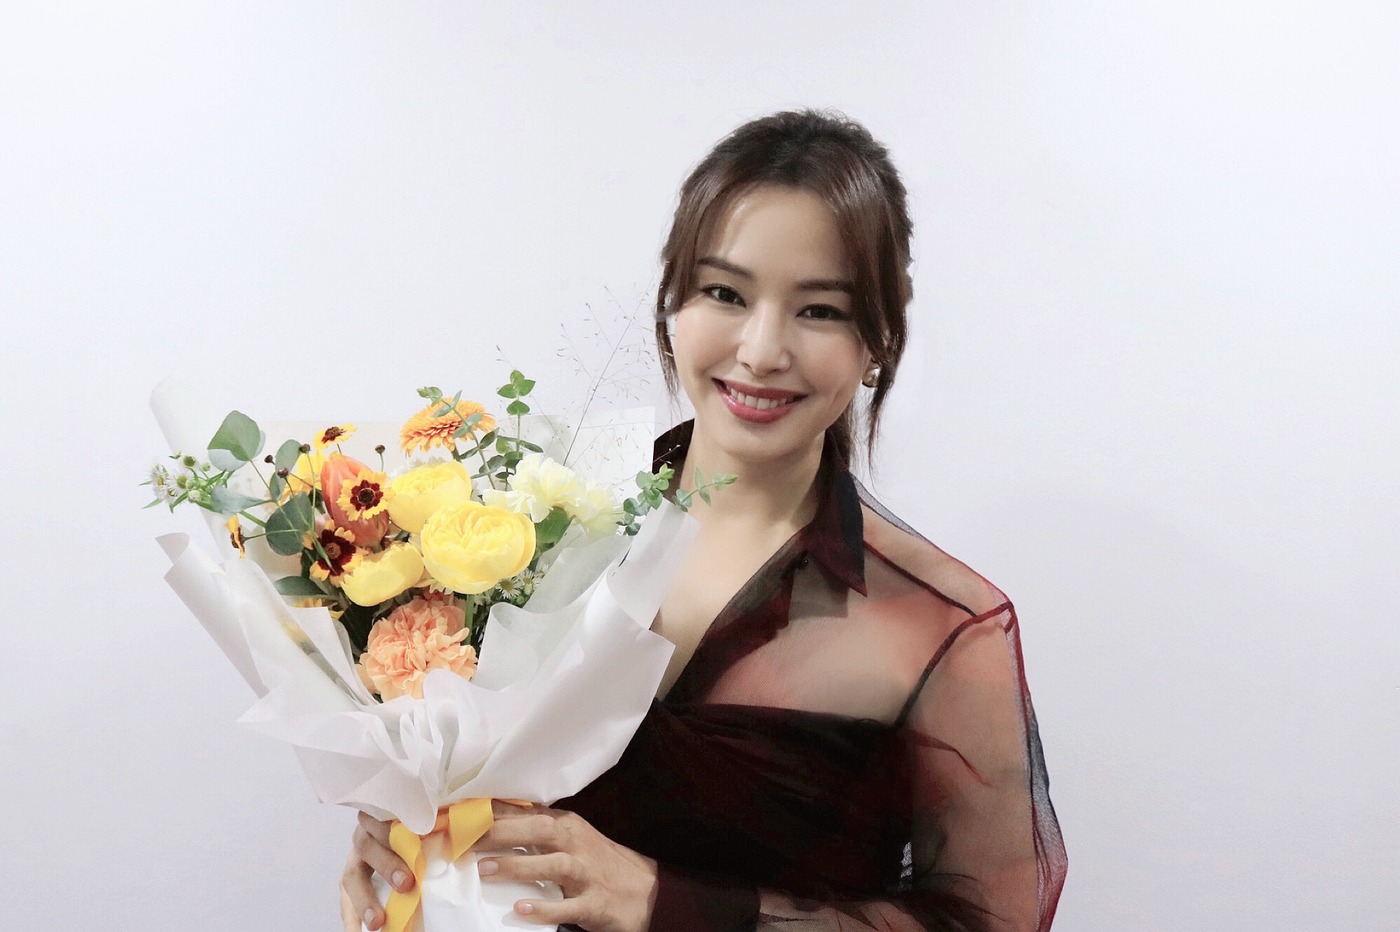 Lee Ha-nui was awarded the Minister of Culture, Sports and Tourism Award at the 2019 South Korea Popular Culture and Arts Awards held at the Olympic Hall in Jamsil-gu, Seoul on the 30th.Lee Ha-nui said, I will do my best to make Korean culture known along the way that my seniors have cleaned up as the platform is being opened as time goes by. Thank you for loving the popular culture.The South Korea Popular Culture and Arts Award ceremony, which celebrates its 10th anniversary this year, is a government award system designed to raise the social status of popular culture artists and encourage efforts and achievements.Lee Ha-nui has contributed to the development of South Korea pop culture and arts by working on movies and dramas.Lee Ha-nui has been named as a full-time solver Jang Hyung-sa in the movie Extreme Job (director Lee Byung-hun), which has achieved the second highest domestic box office record, and has recently been named as a 10 million actors. In the SBS drama The Hot Blood Priest (directed by Lee Myung-woo/playplayplayplayed by Park Jae-bum), He played the role of Sun and renewed his life character.Both movies and dramas are running on the box office road in succession, solidifying their position as a entertainment guarantee check.Meanwhile, Lee Ha-nui will meet Audiences in the movie Black Money, which will be released on November 13, as an international trade elite lawyer with cool reason and judgment.